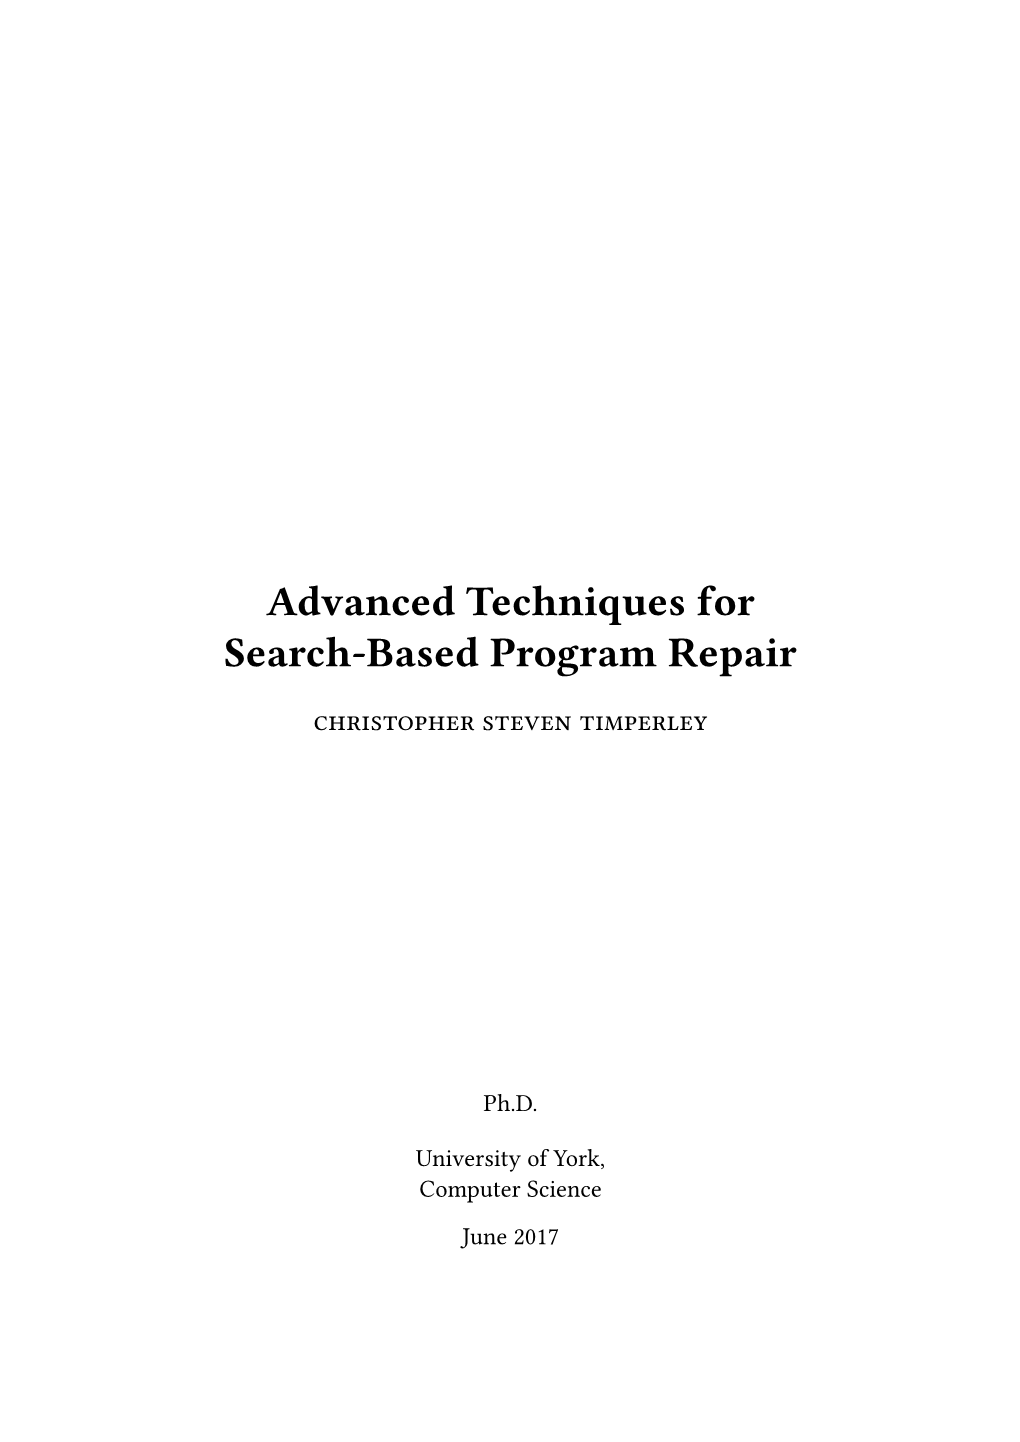 Advanced Techniques for Search-Based Program Repair